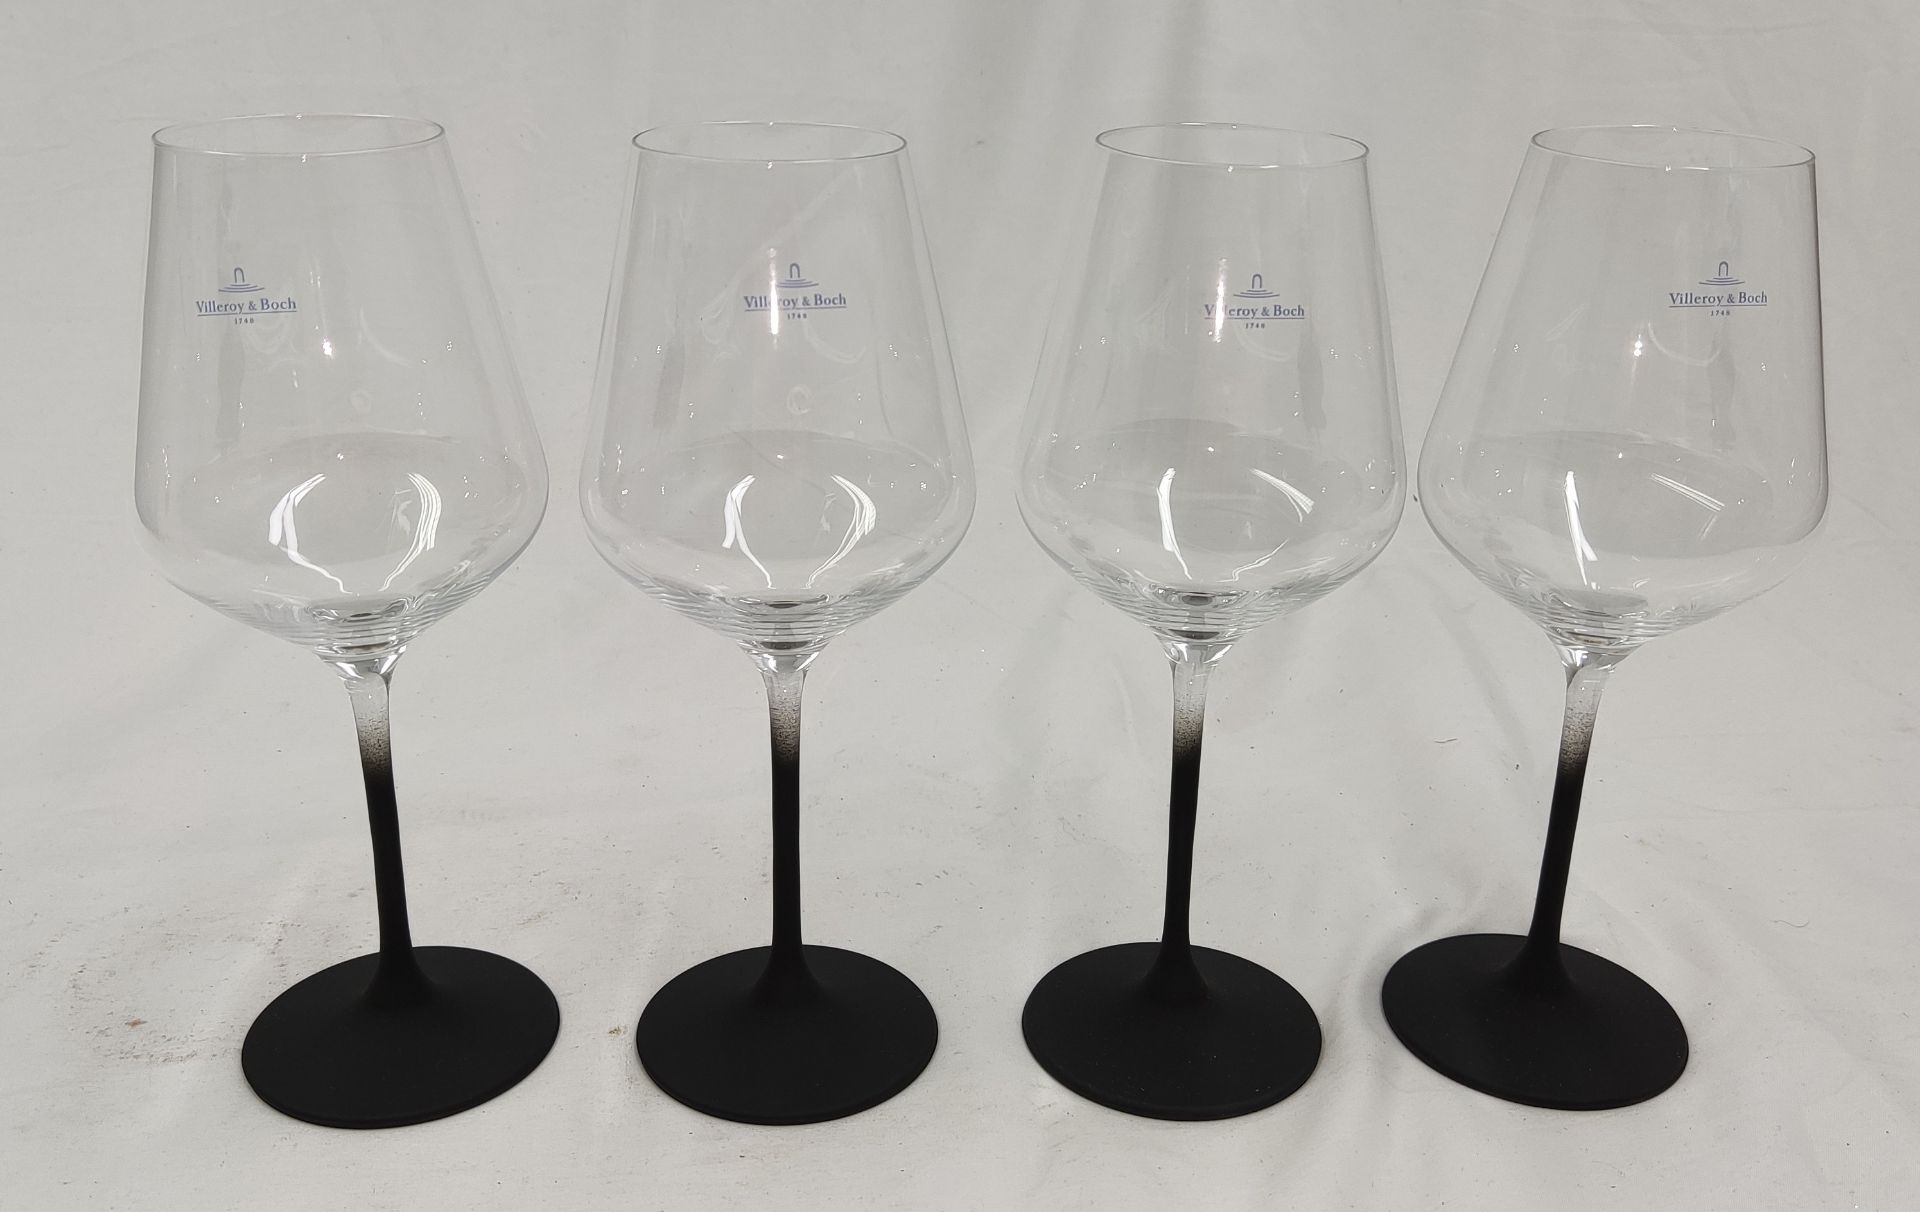 1 x VILLEROY & BOCH Manufacture Rock Red Wine Goblet Set, 4 Piece - New And Boxed - RRP £66 - Ref: - Image 3 of 12